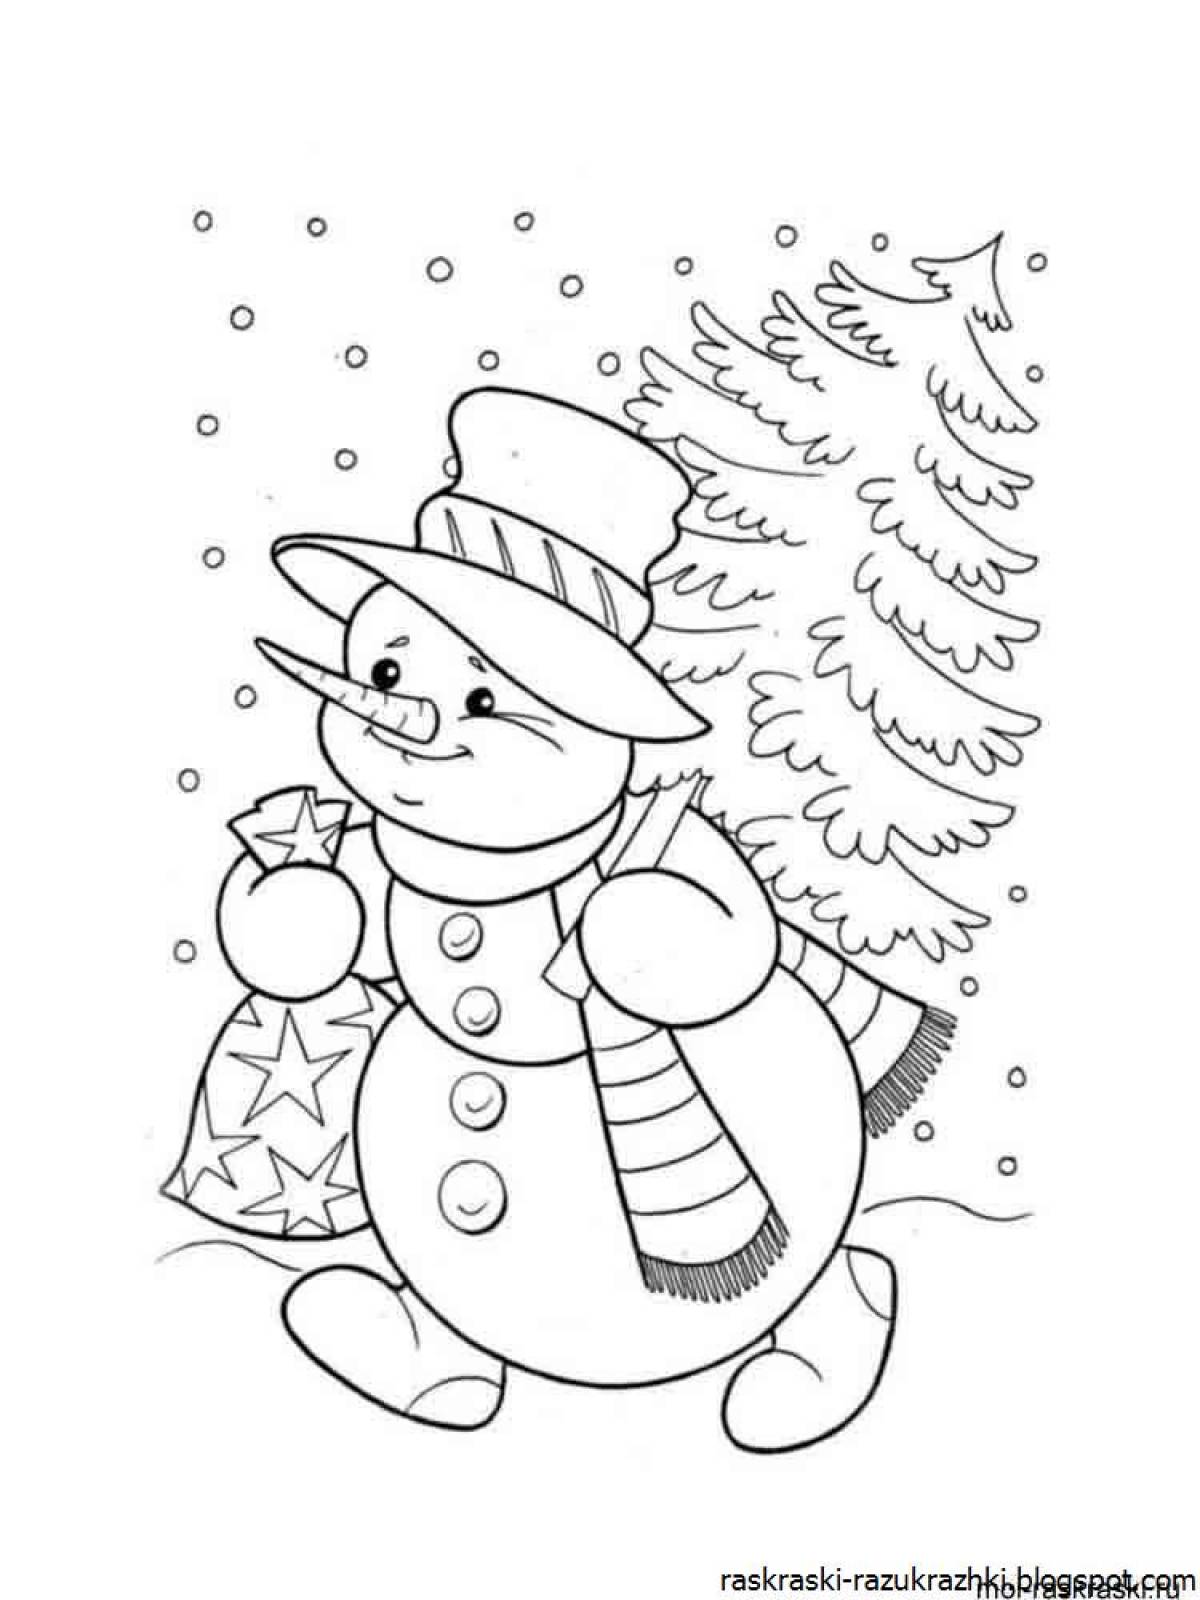 Glitter snowman coloring book for kids